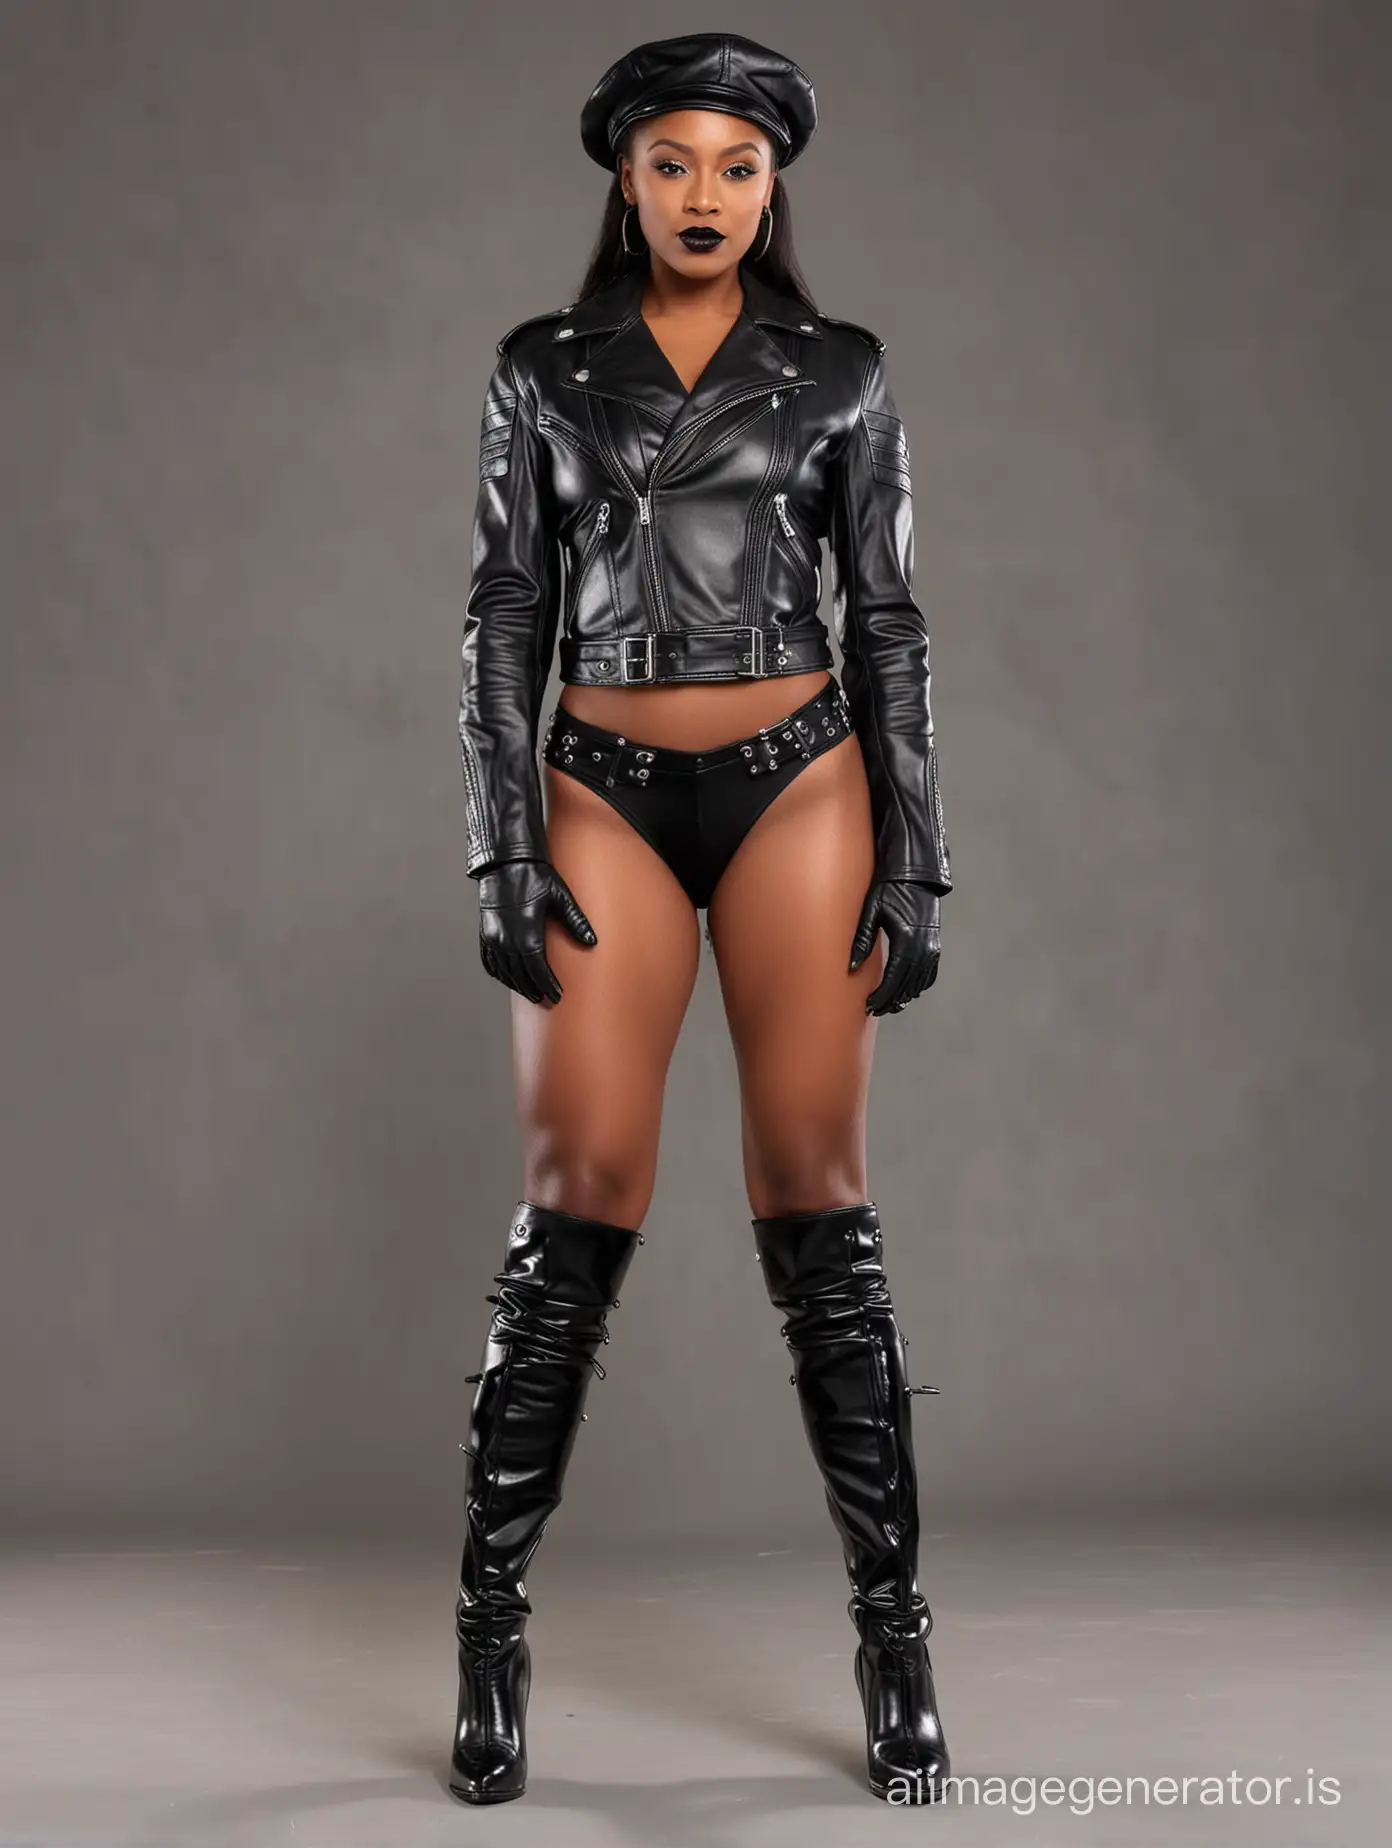 40 year old G-cup muscular ebony woman in black leather gloves, open spiked black motorcycle jacket, bare legs, black lipstick, leather masters cap, high heel leather boots